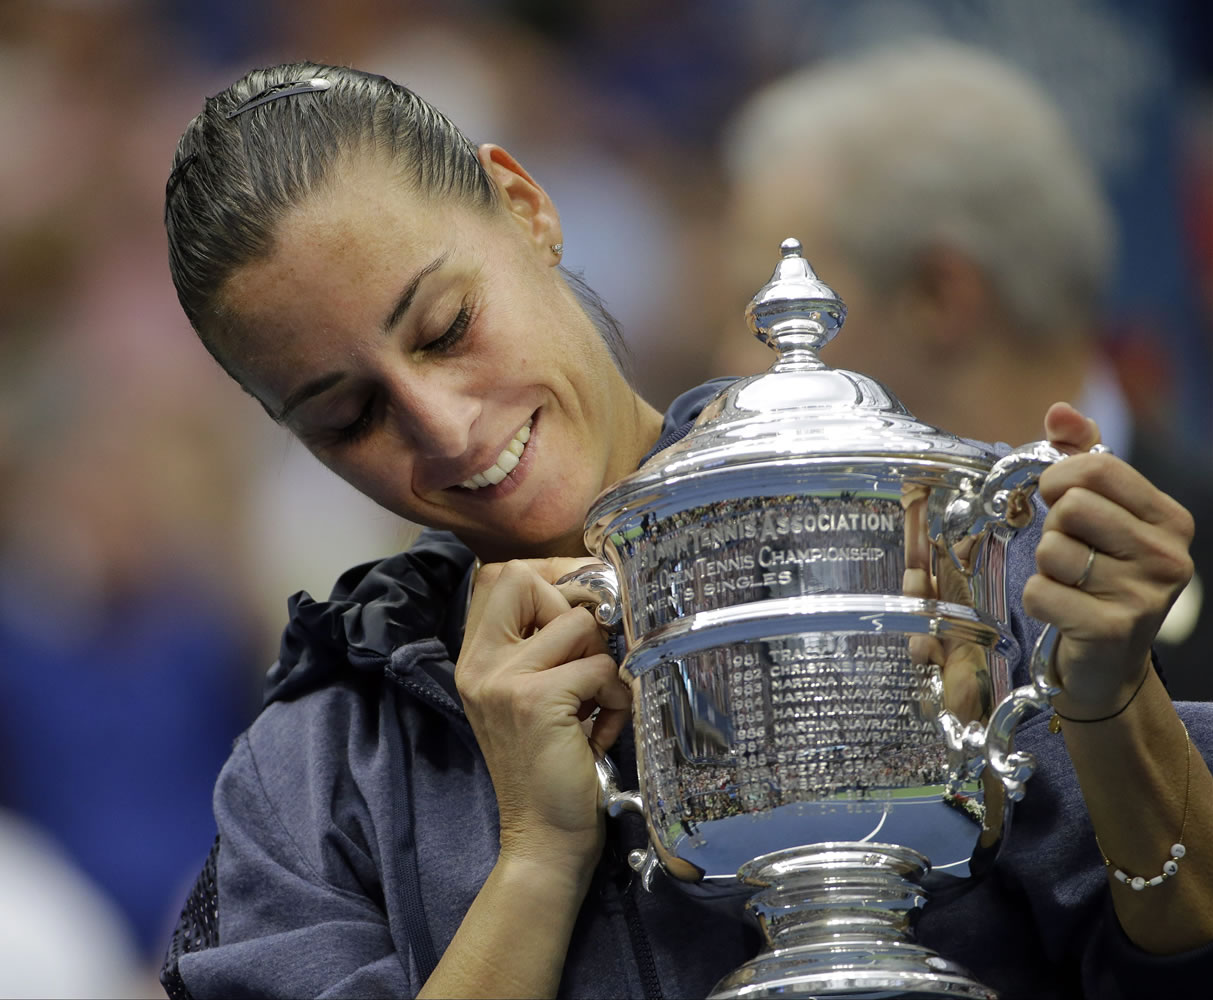 Flavia Pennetta, of Italy, holds up the championship trophy after beating Roberta Vinci, of Italy, in the women's championship match of the U.S. Open tennis tournament, Saturday, Sept. 12, 2015, in New York.